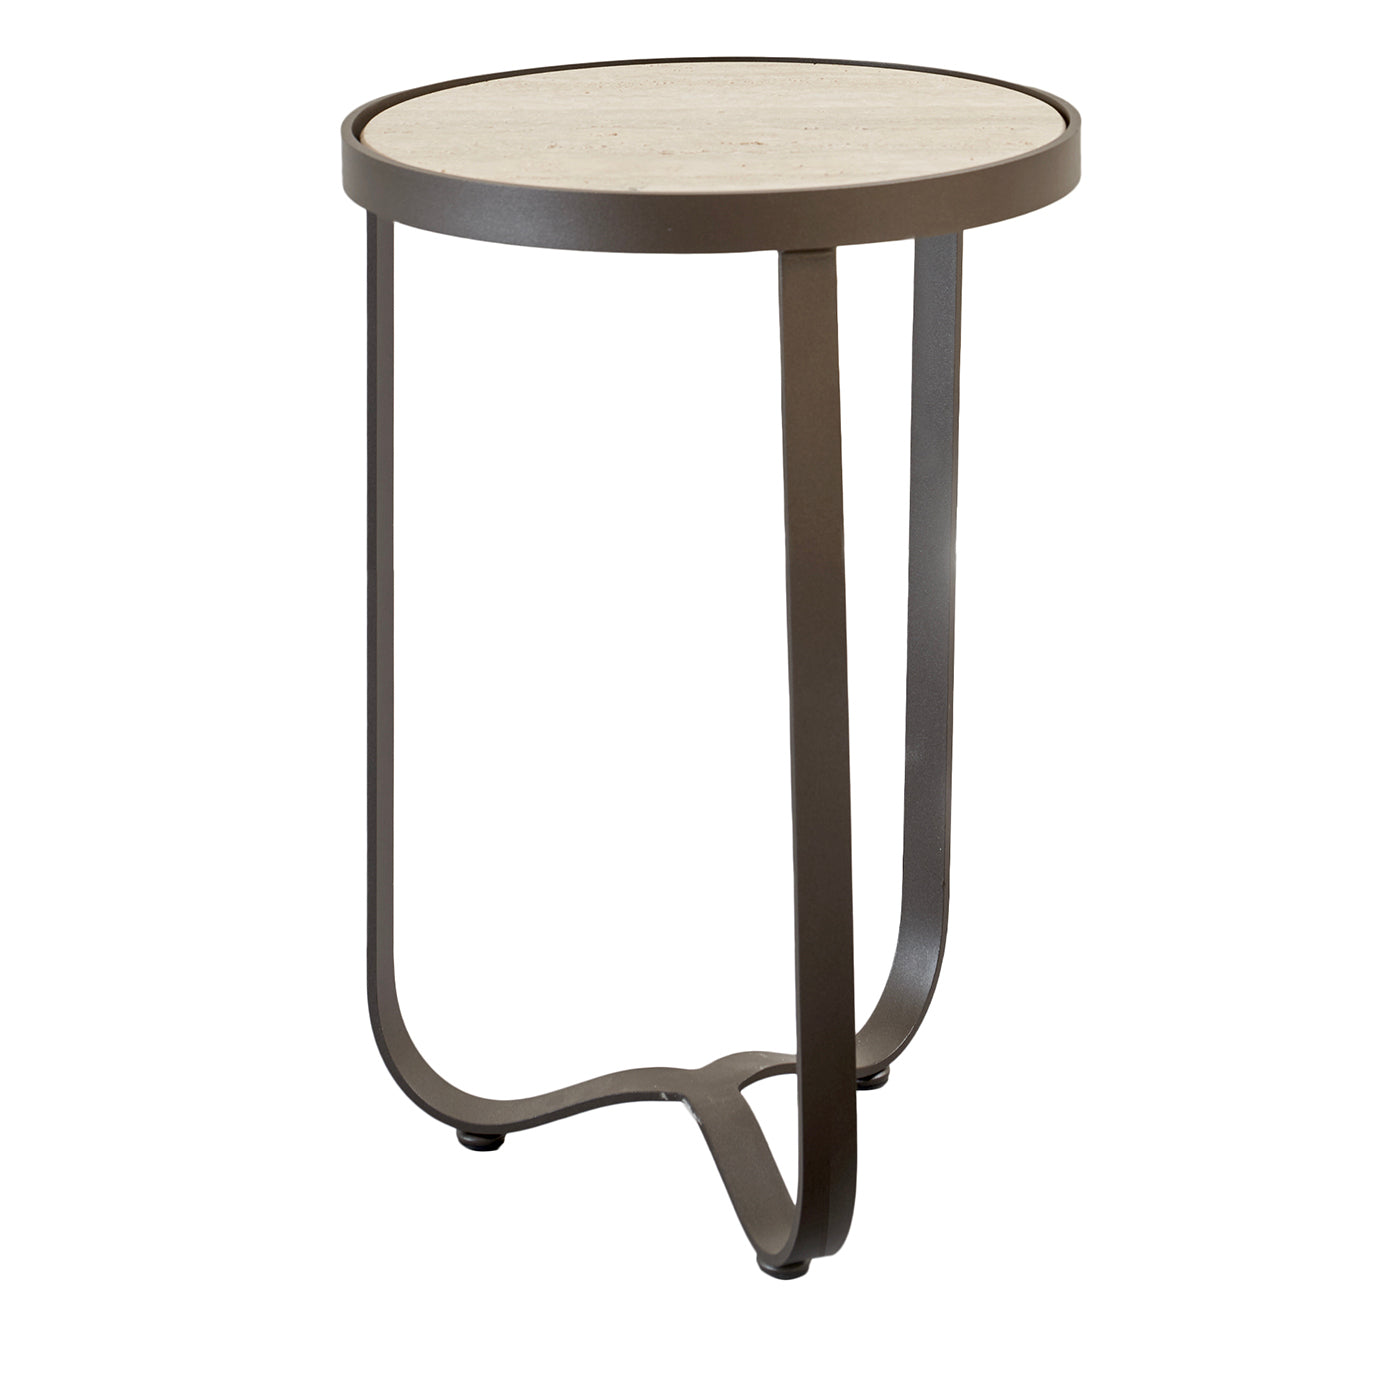 Amalfi Gray Round Side Table by Studio 63 in Stainless Steel - Main view